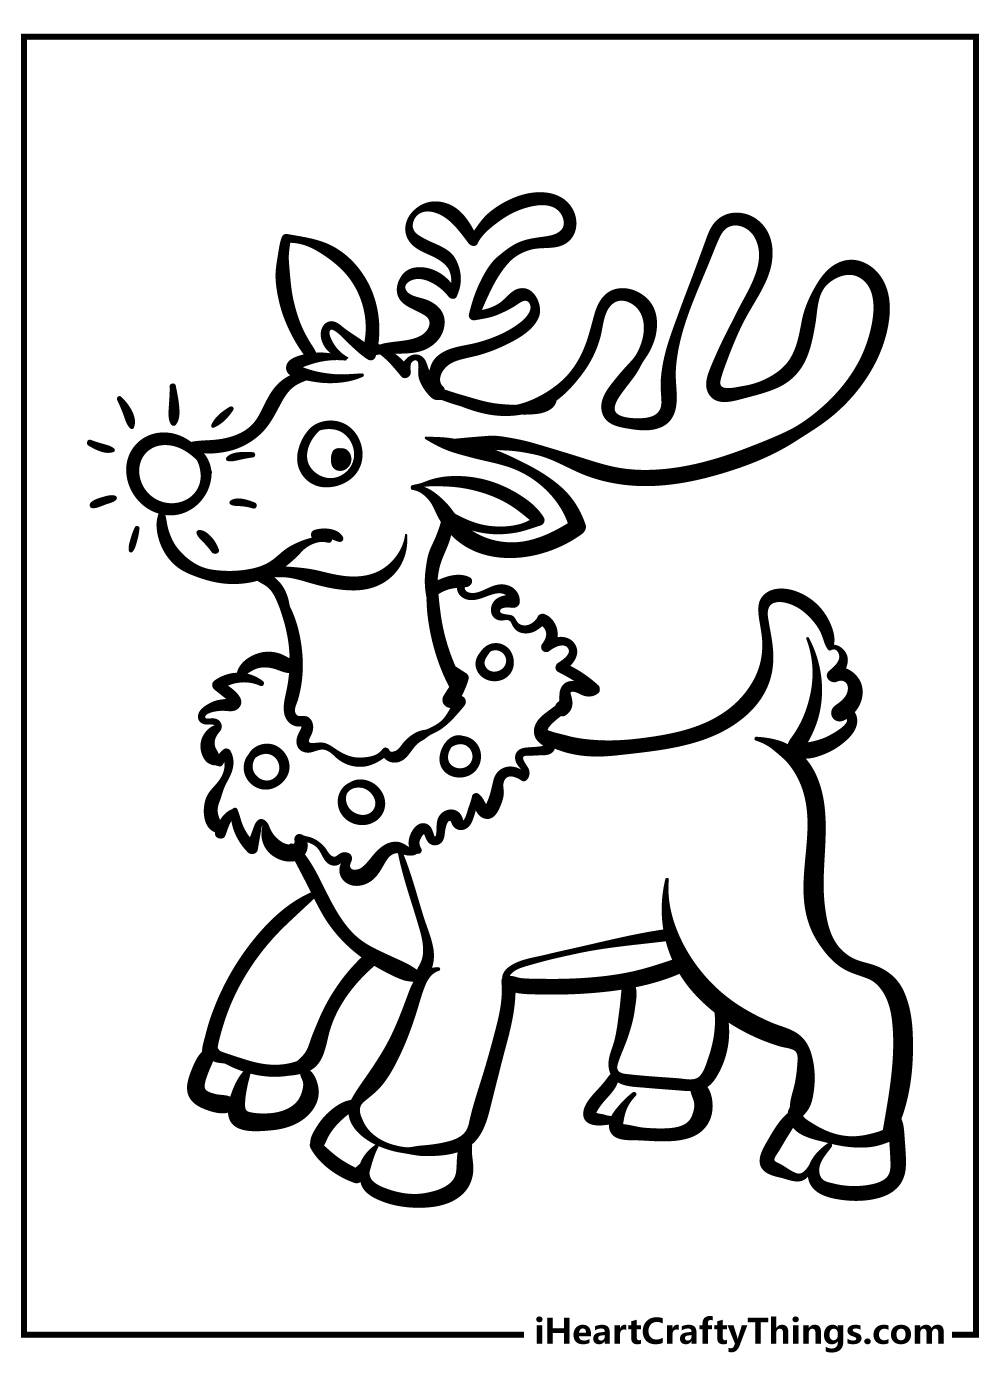 Rudolph Coloring Sheet for children free download